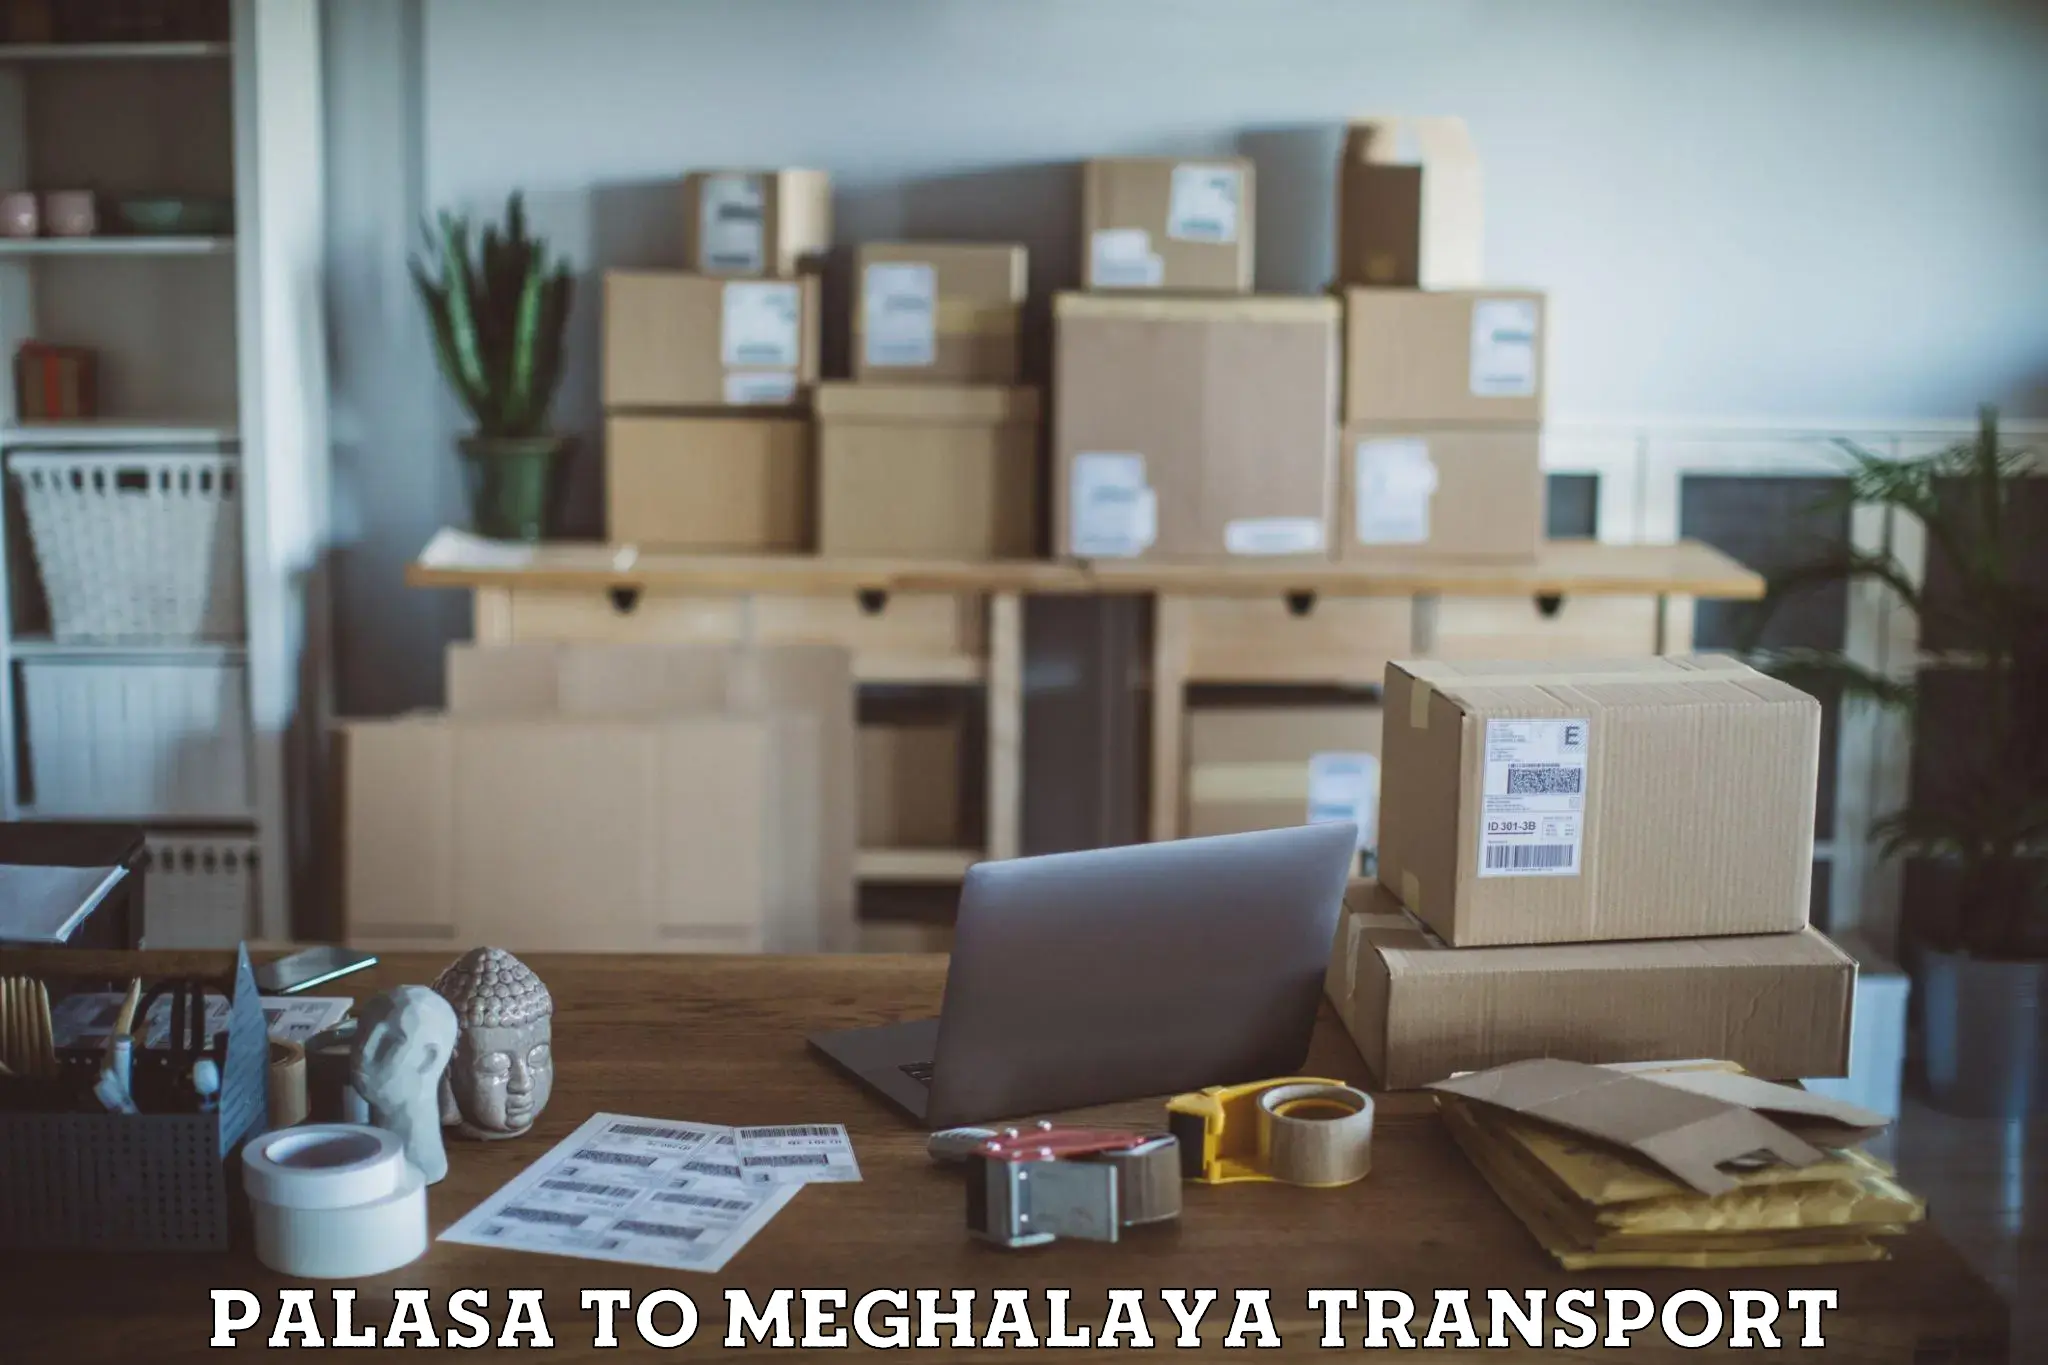 Transport bike from one state to another Palasa to Meghalaya